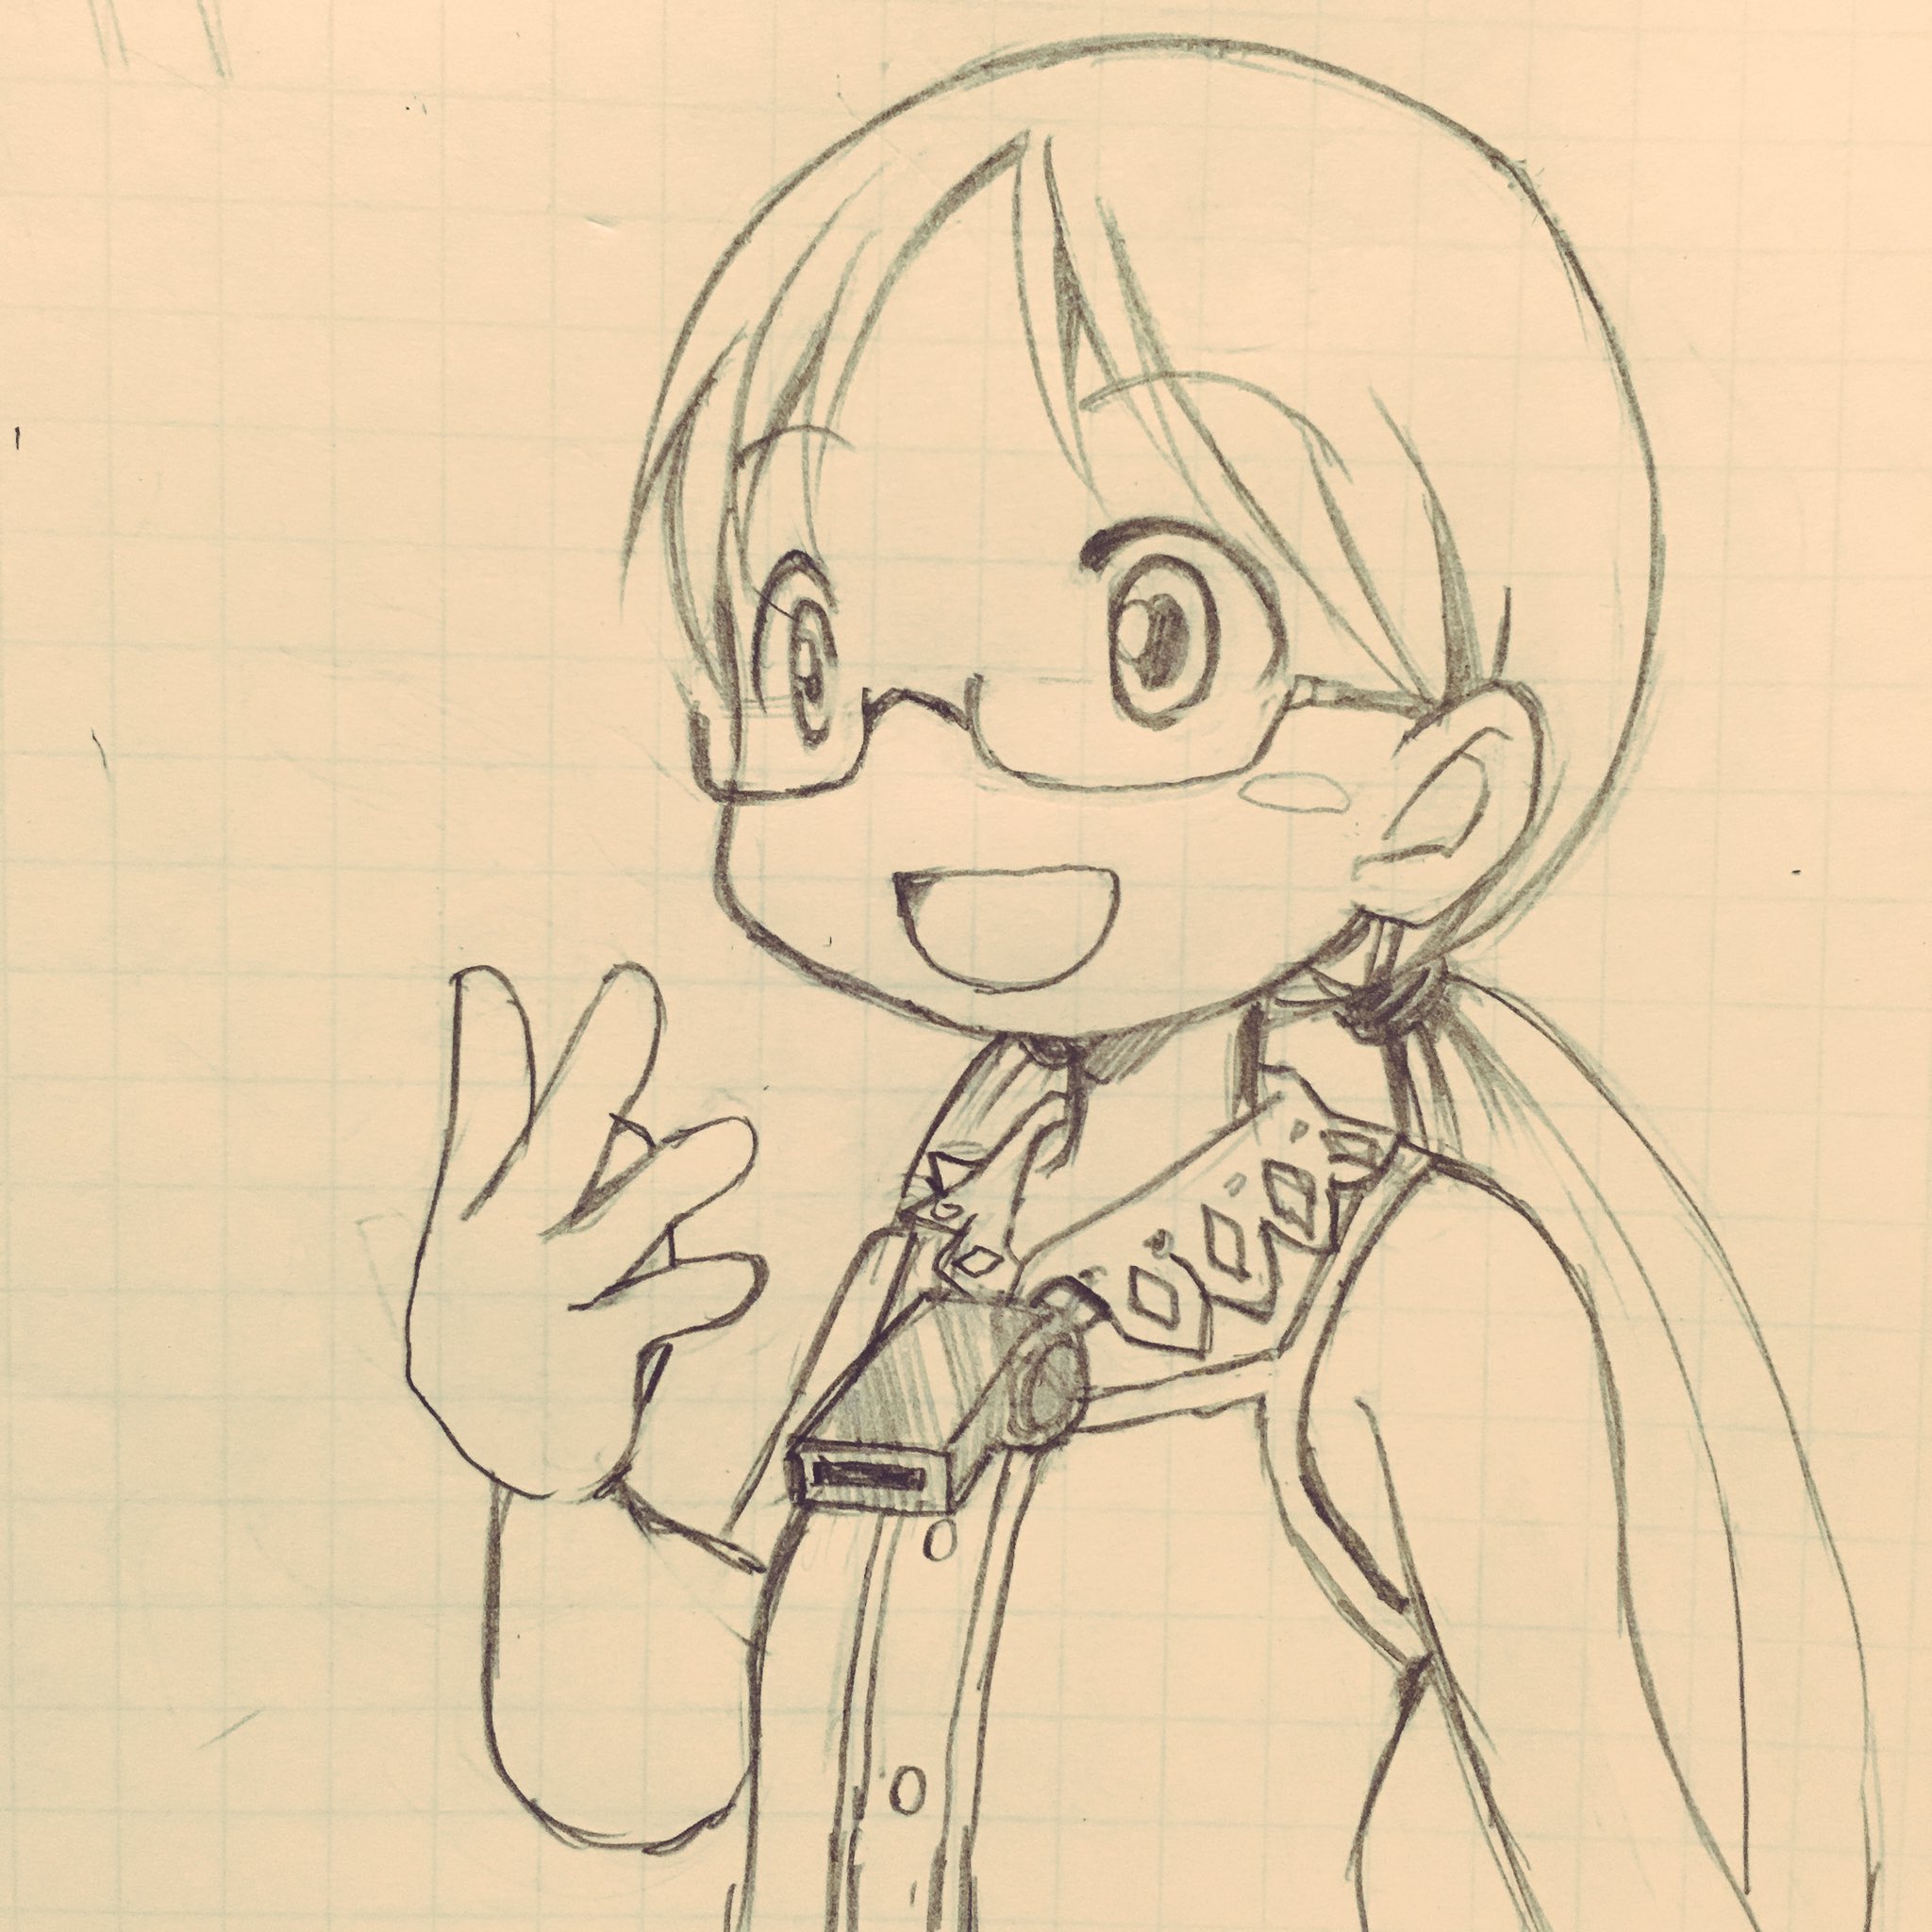 What is Riko noticing here? I am drawing a blank for some reason. :  r/MadeInAbyss